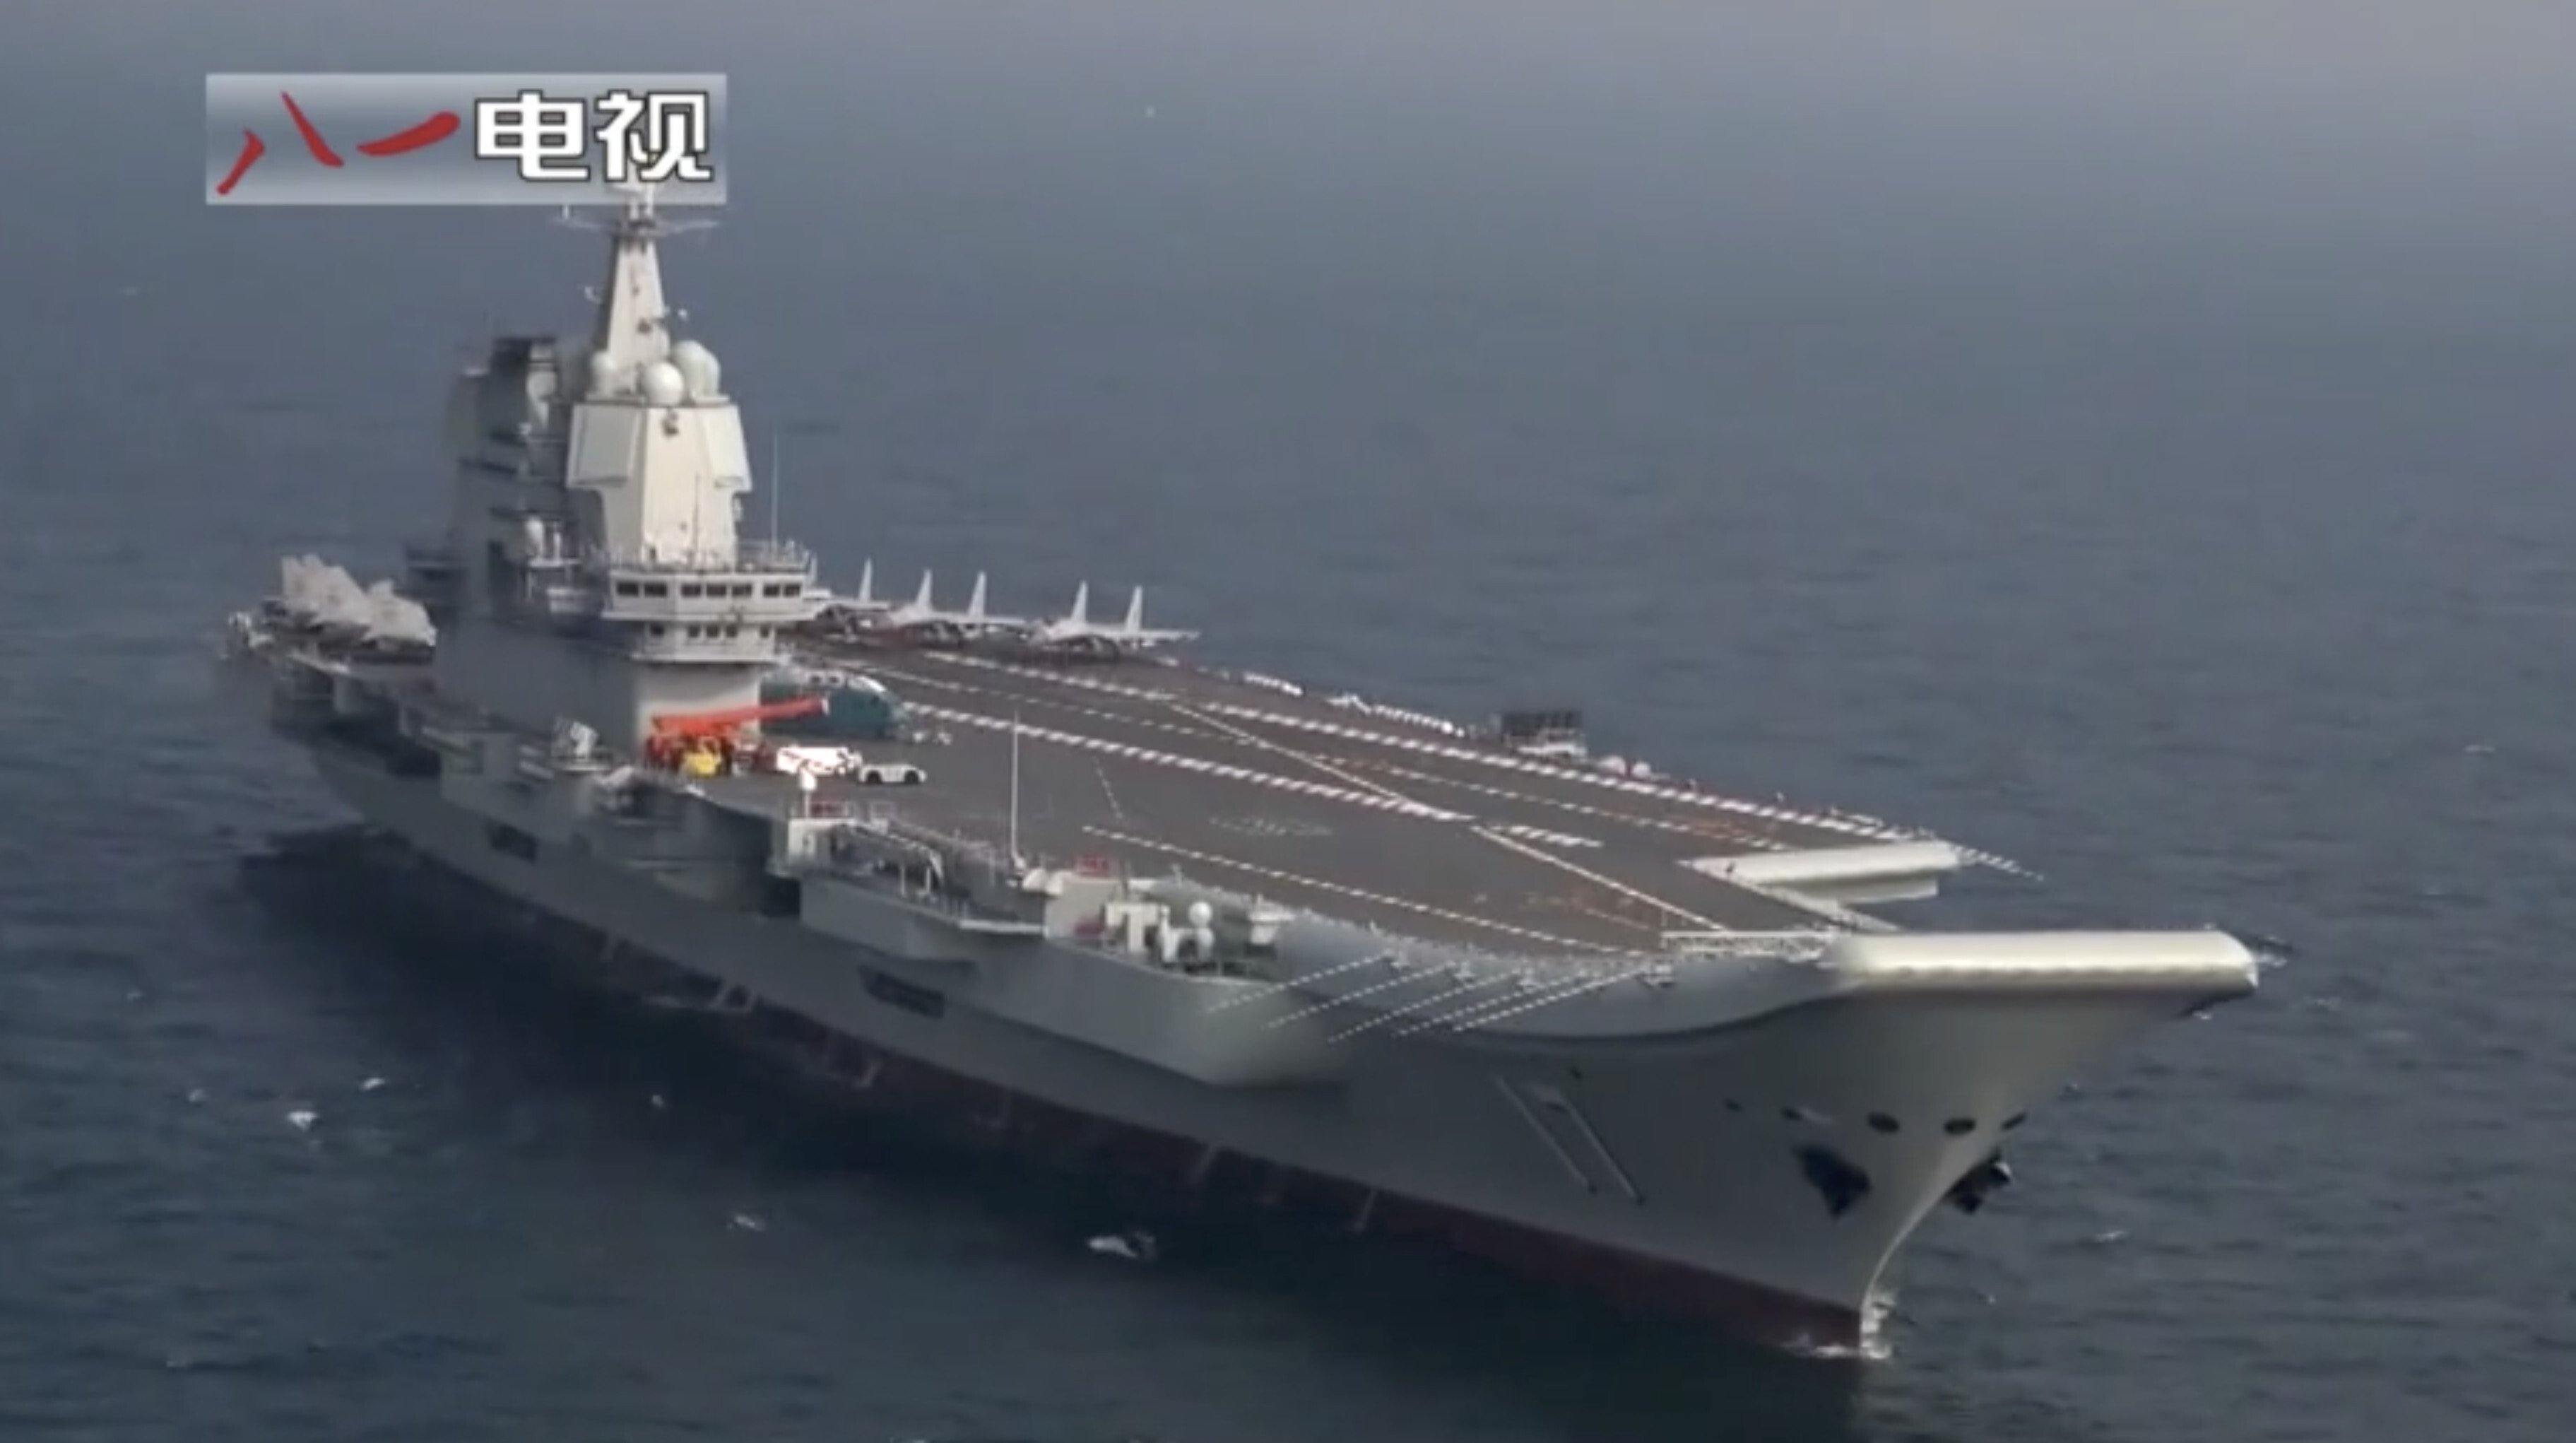 China's Shandong aircraft carrier ready for high seas test, insider says | South China Morning Post